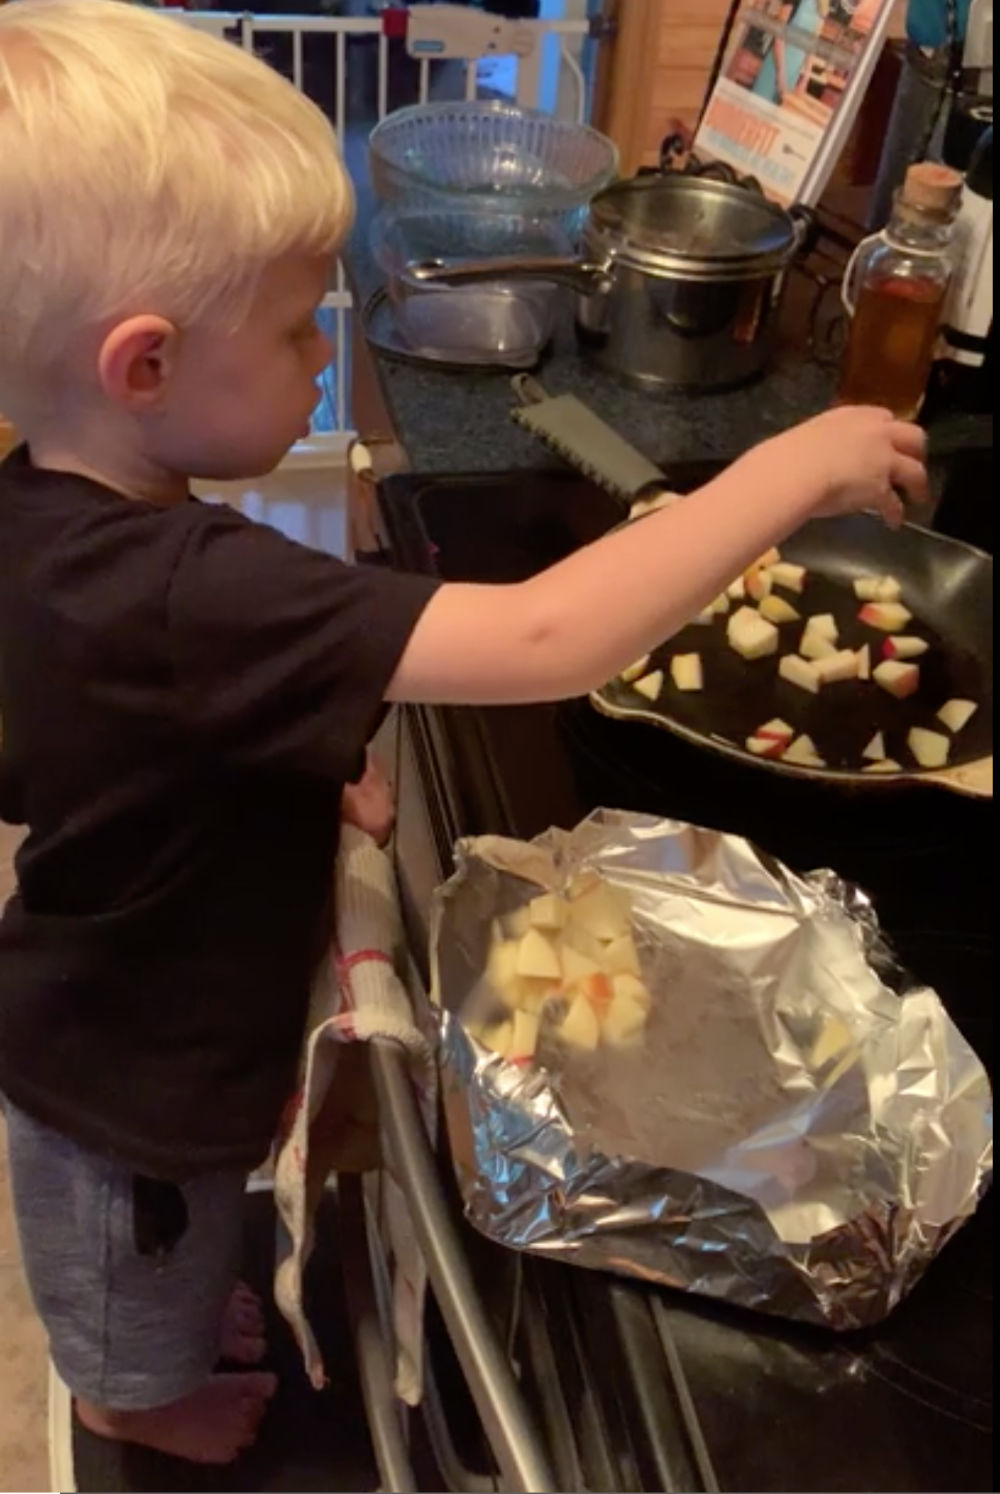 Toddler helping cook with cast iron